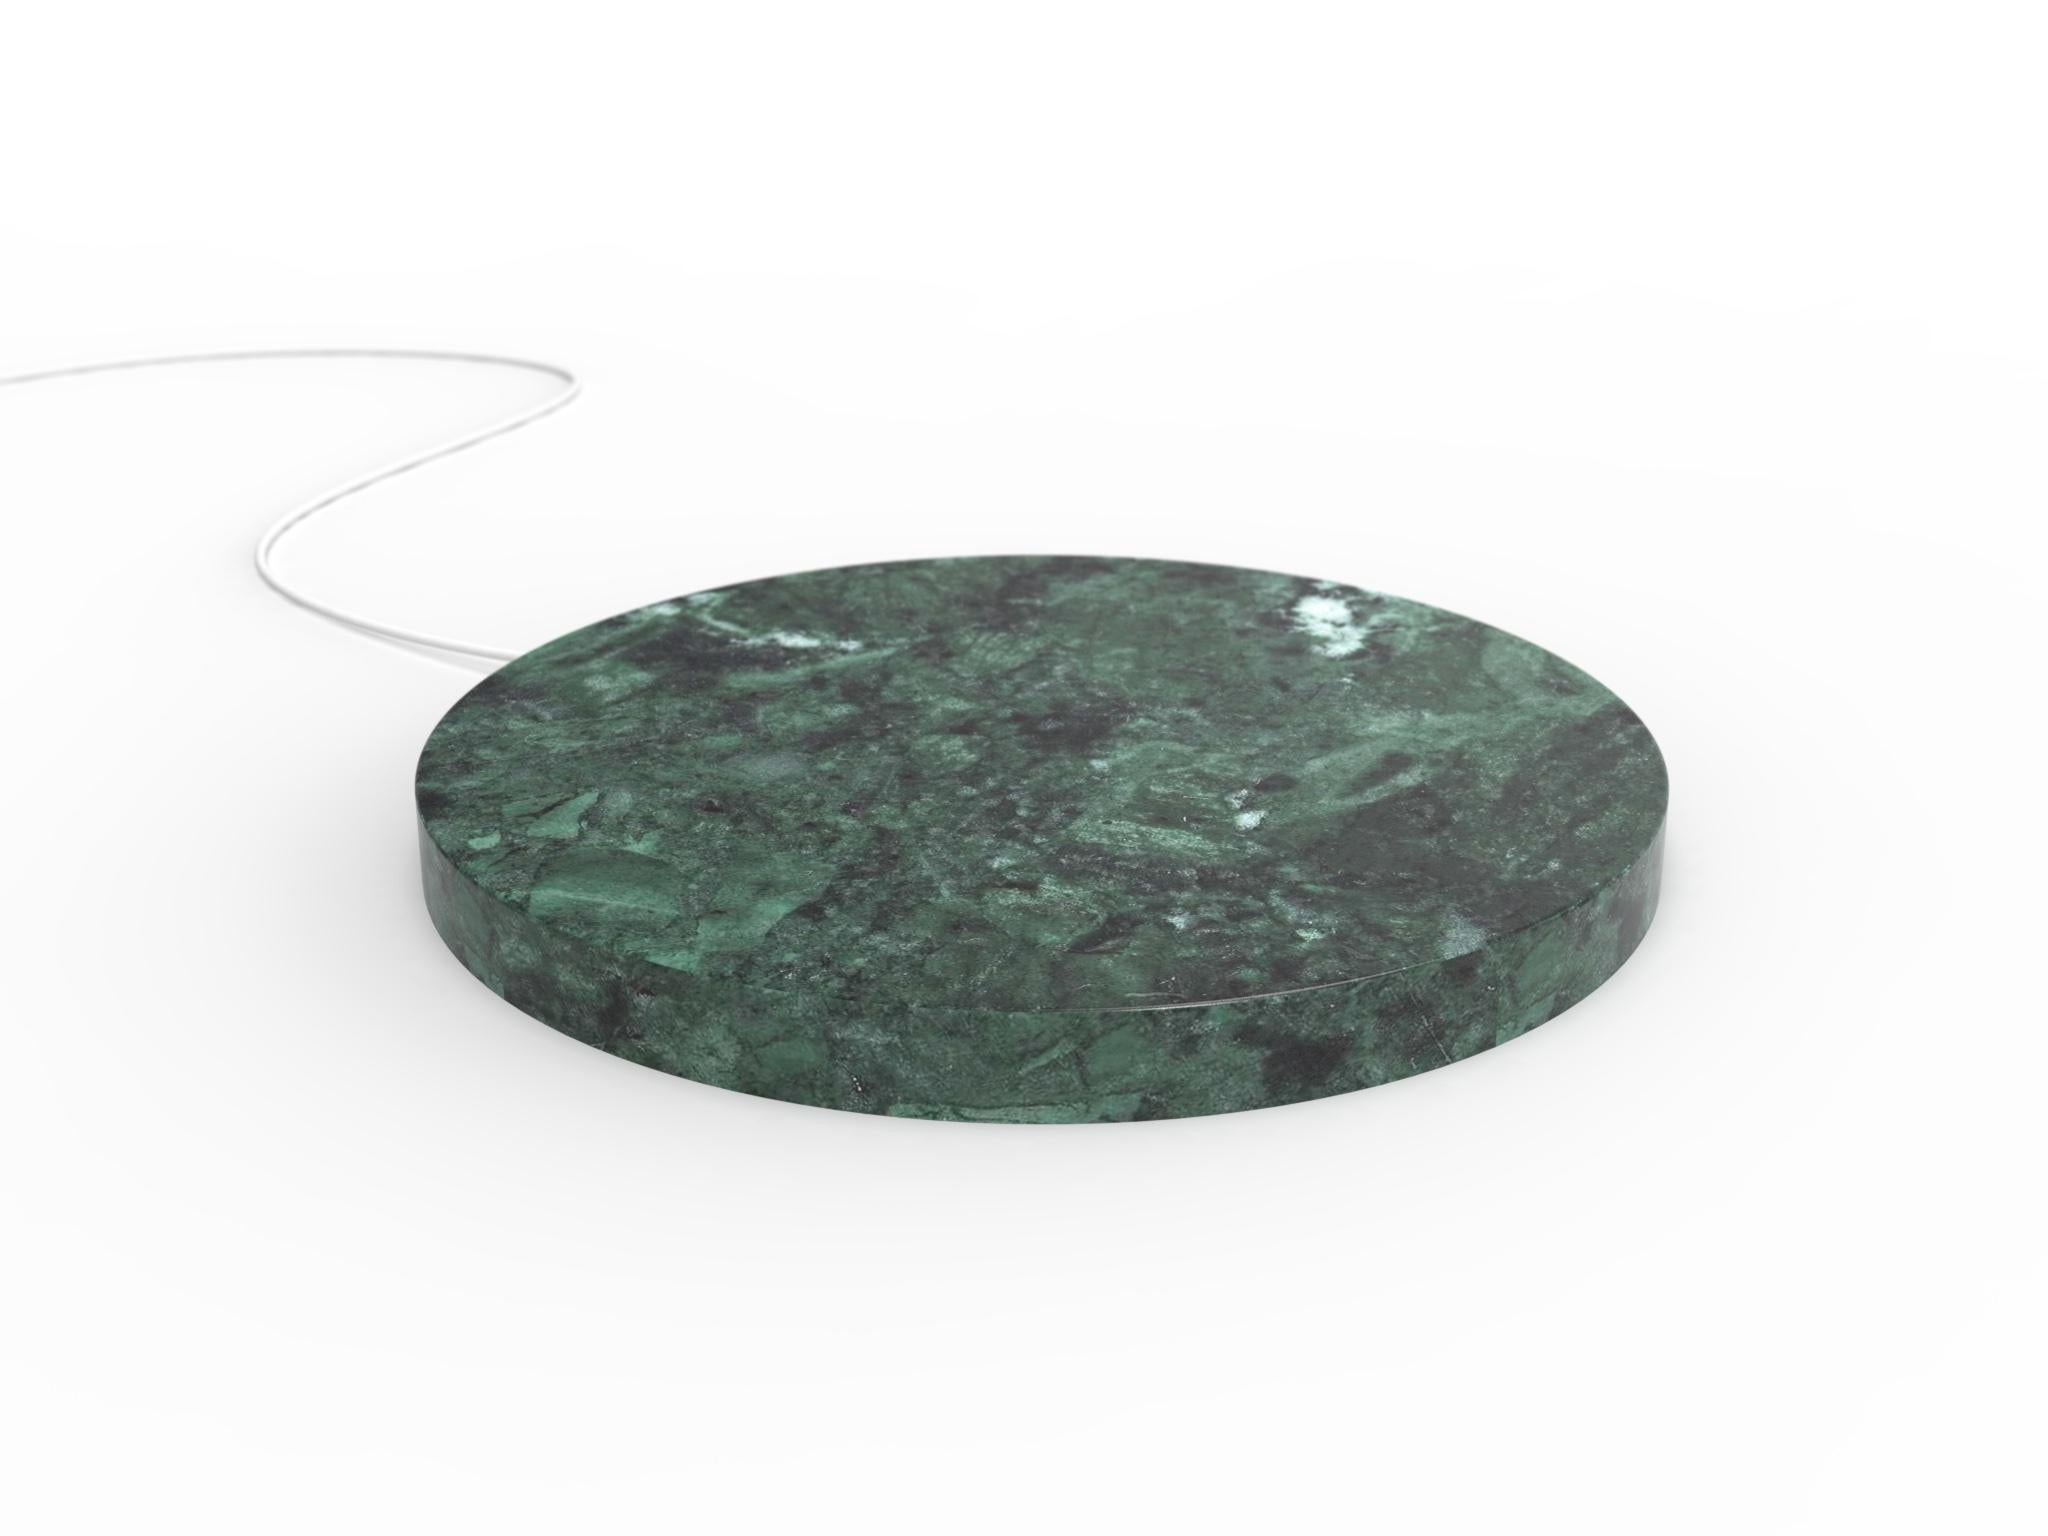 A marble base,
that quickly charge your phone, with a touch of magic.
 
A circle, 
a stone, 
realized with the care that marble requires.

A powerful wireless charging technology ensures an efficient and reliable power delivery.

The result is a